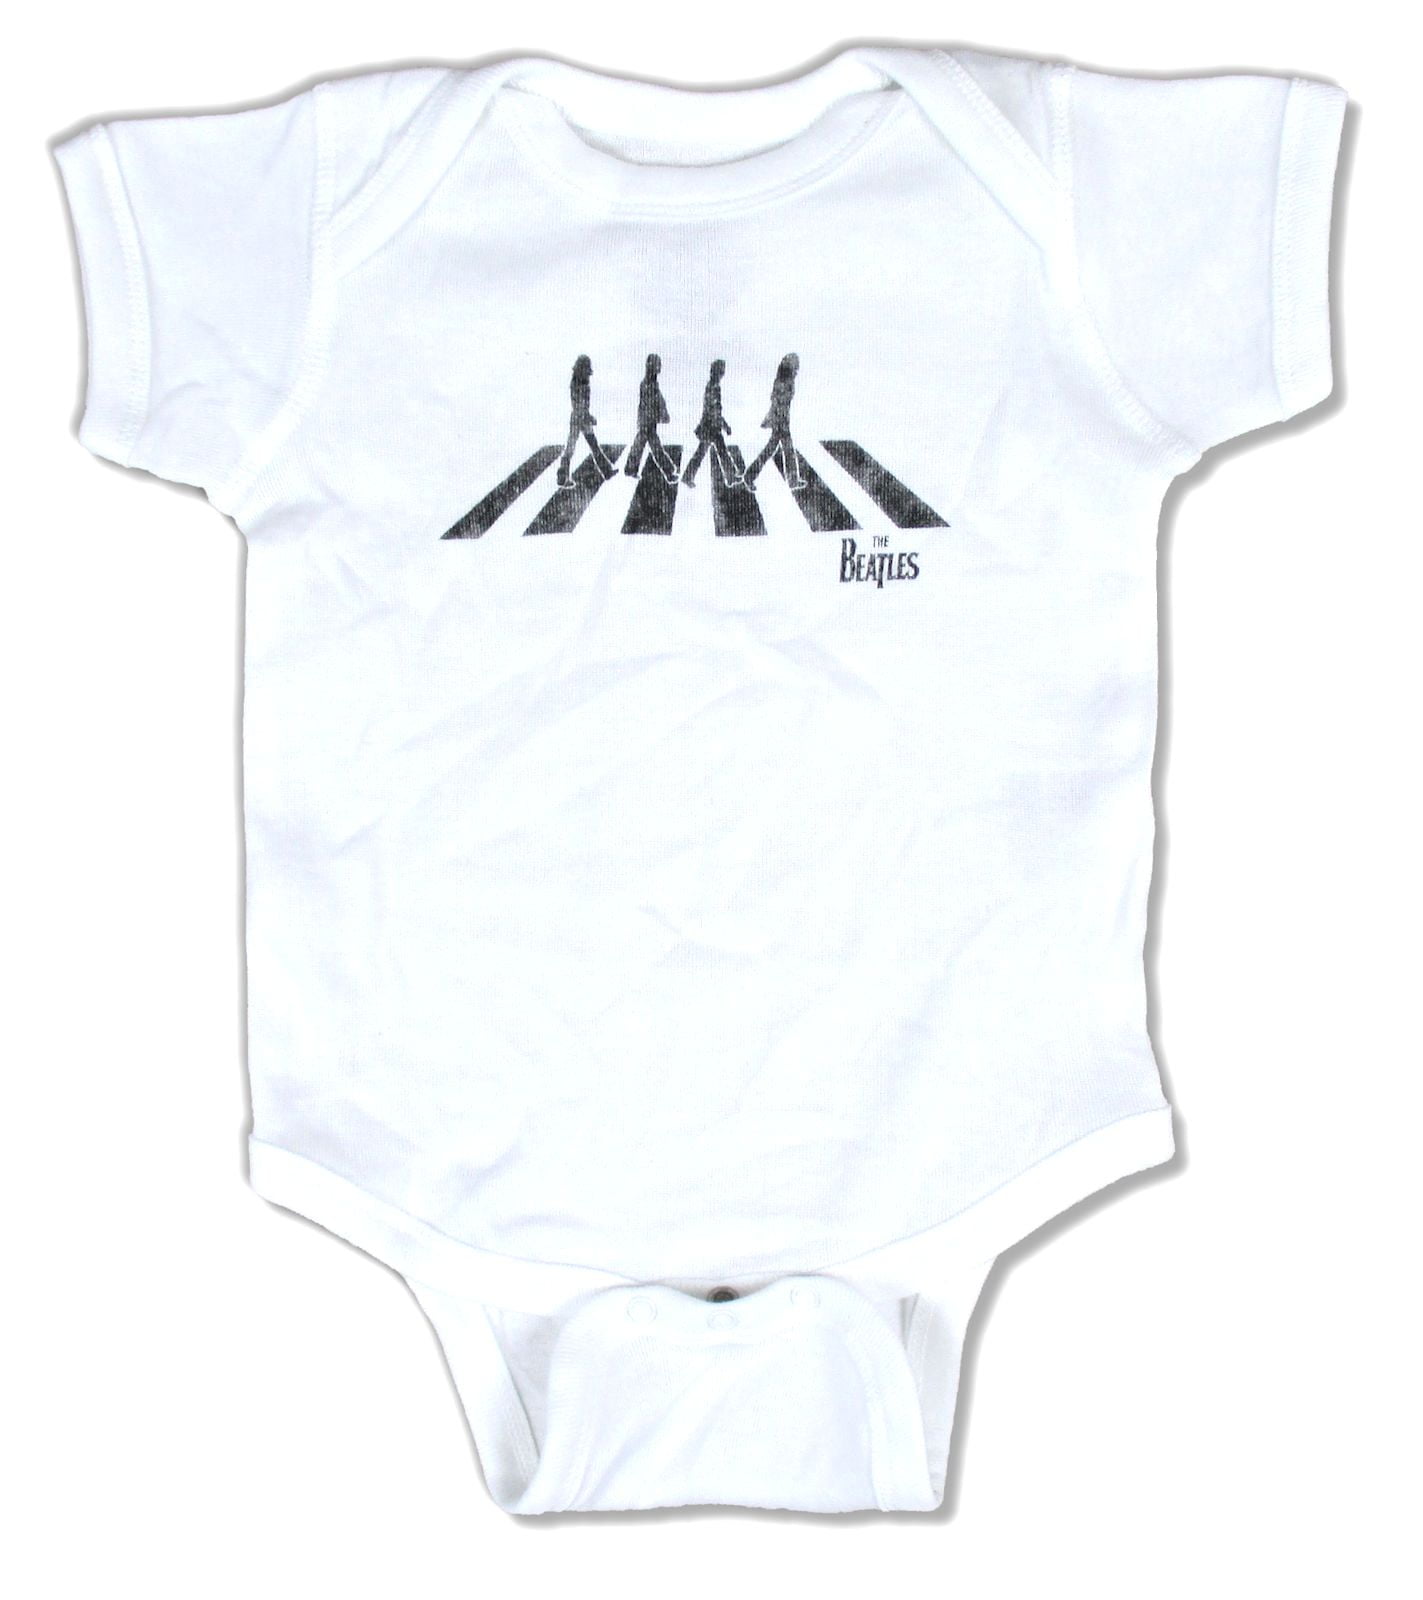 BEATLES Pop Rock ALL YOU NEED IS LOVE Baby Infant Toddler CLOTHING BODYSUIT New 